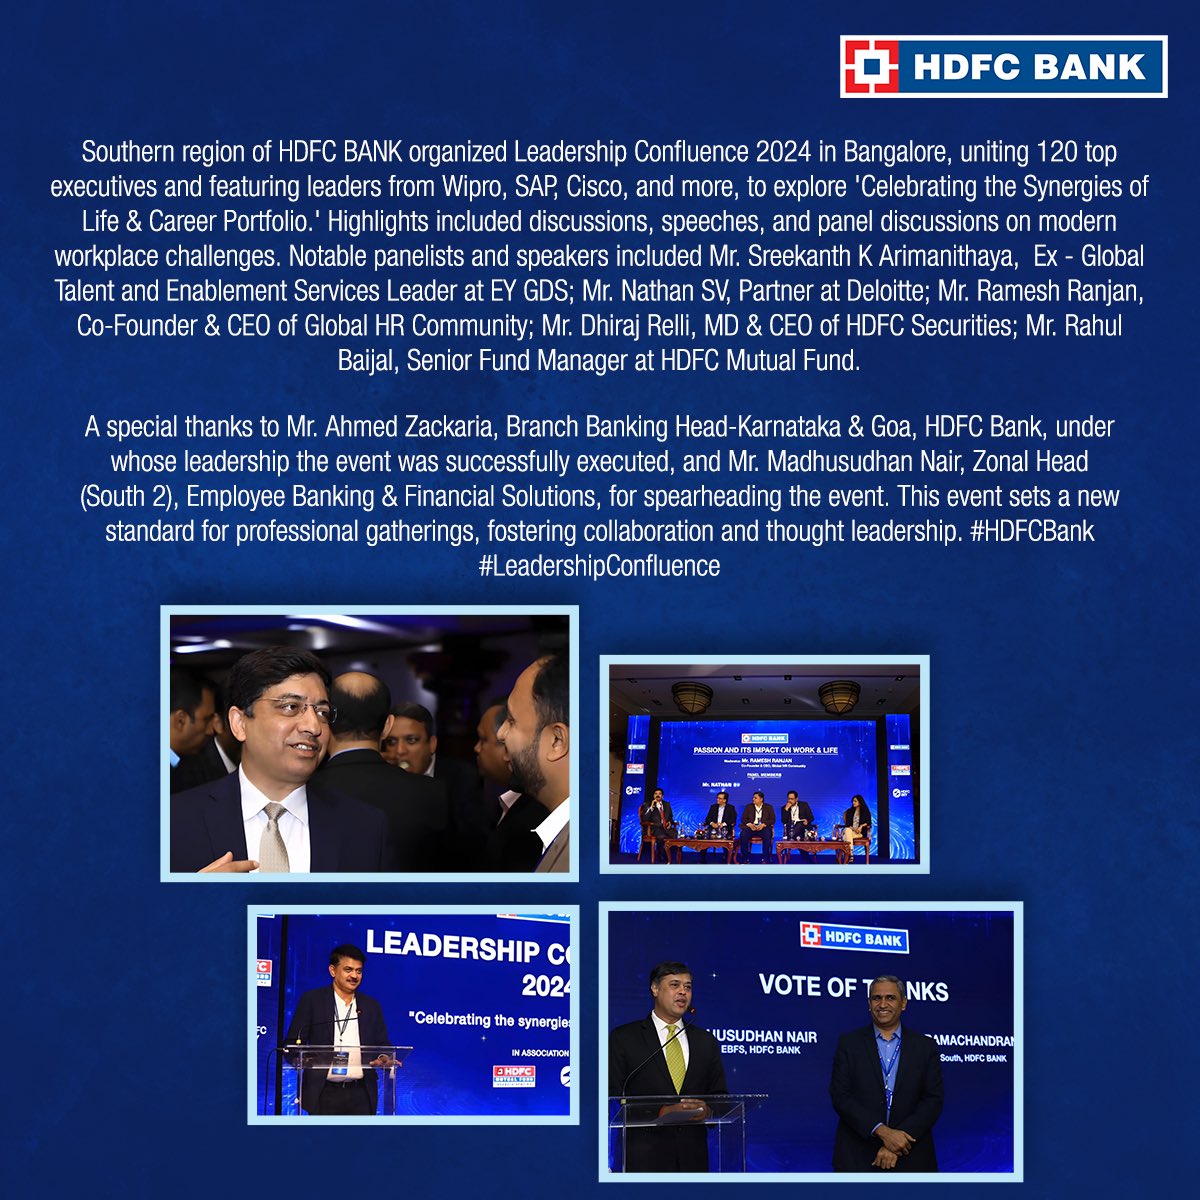 HDFC Bank celebrates life-Career harmony with industry leaders in Bangalore. Read more below: #HDFCBank #LeadershipConfluence #WorkLifeBalance